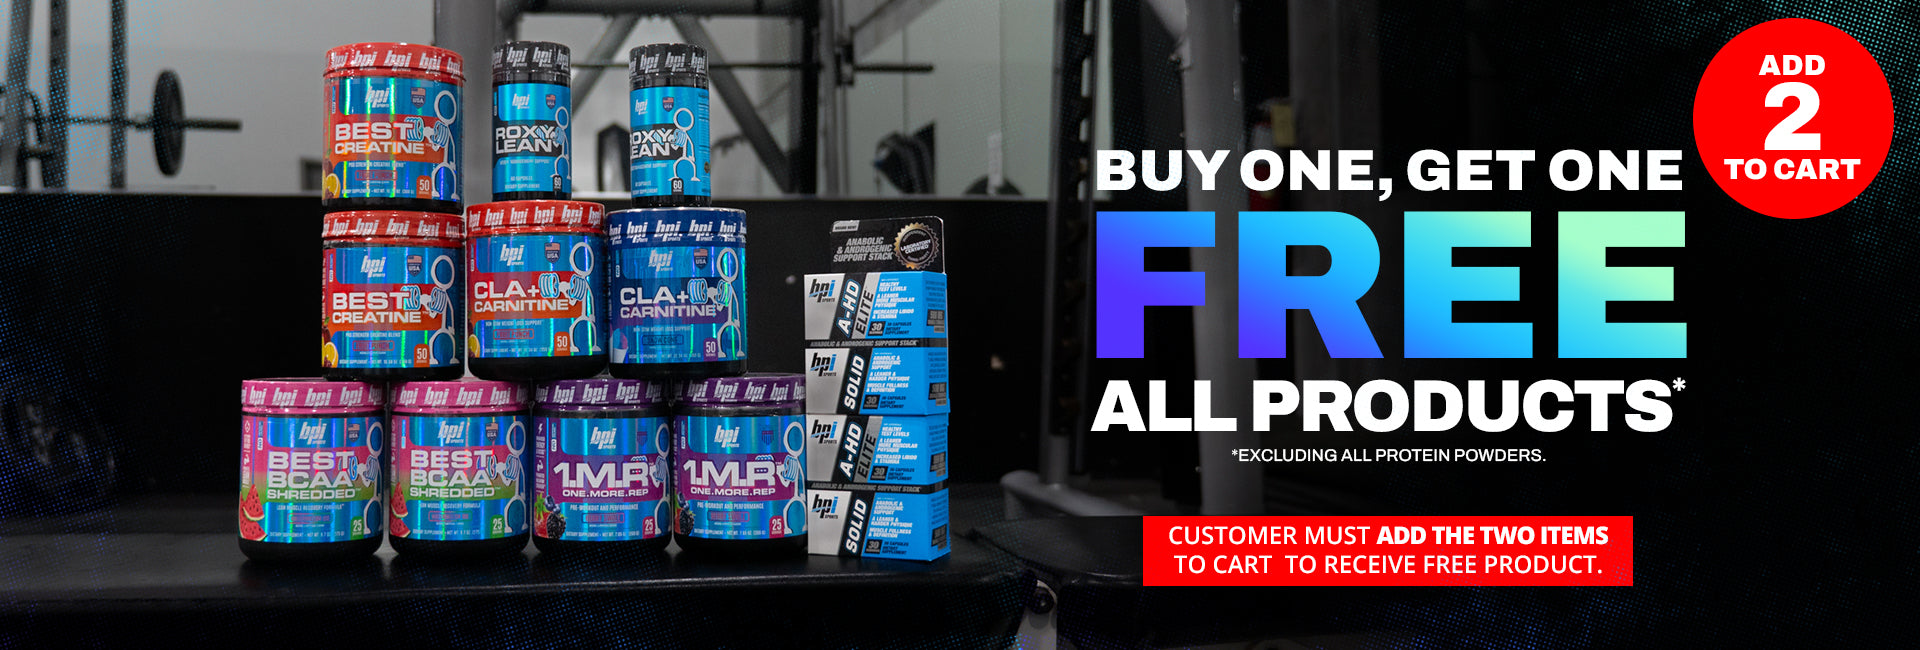 Buy One, Get One Free all Products excluding all protein powders. Customers must add the two items to cart to receive free products